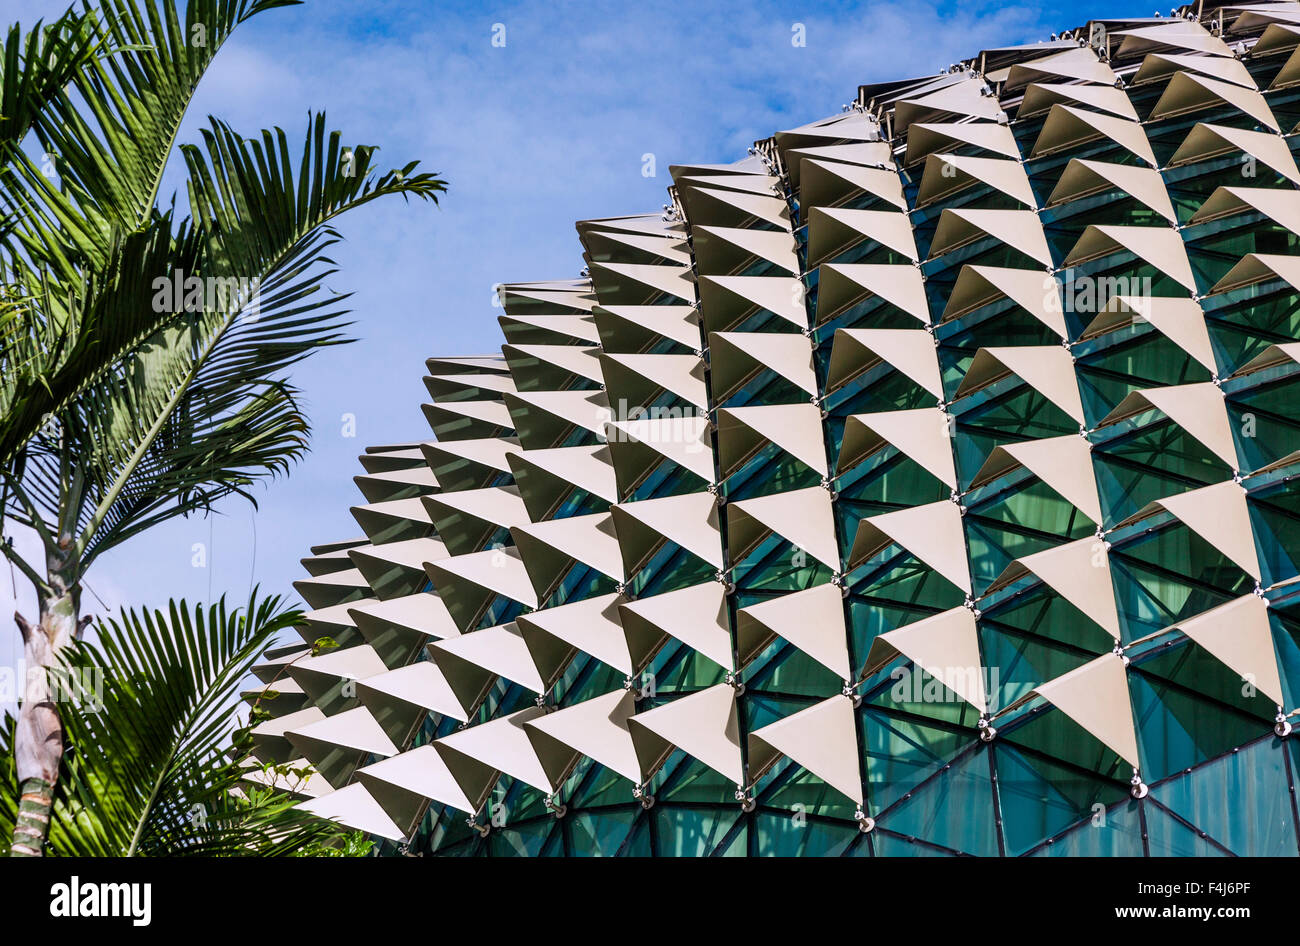 Singapore, detail view of the aluminium sunshade ornamented roof of the performance arts complex Esplanade, Theatres on the Bay Stock Photo